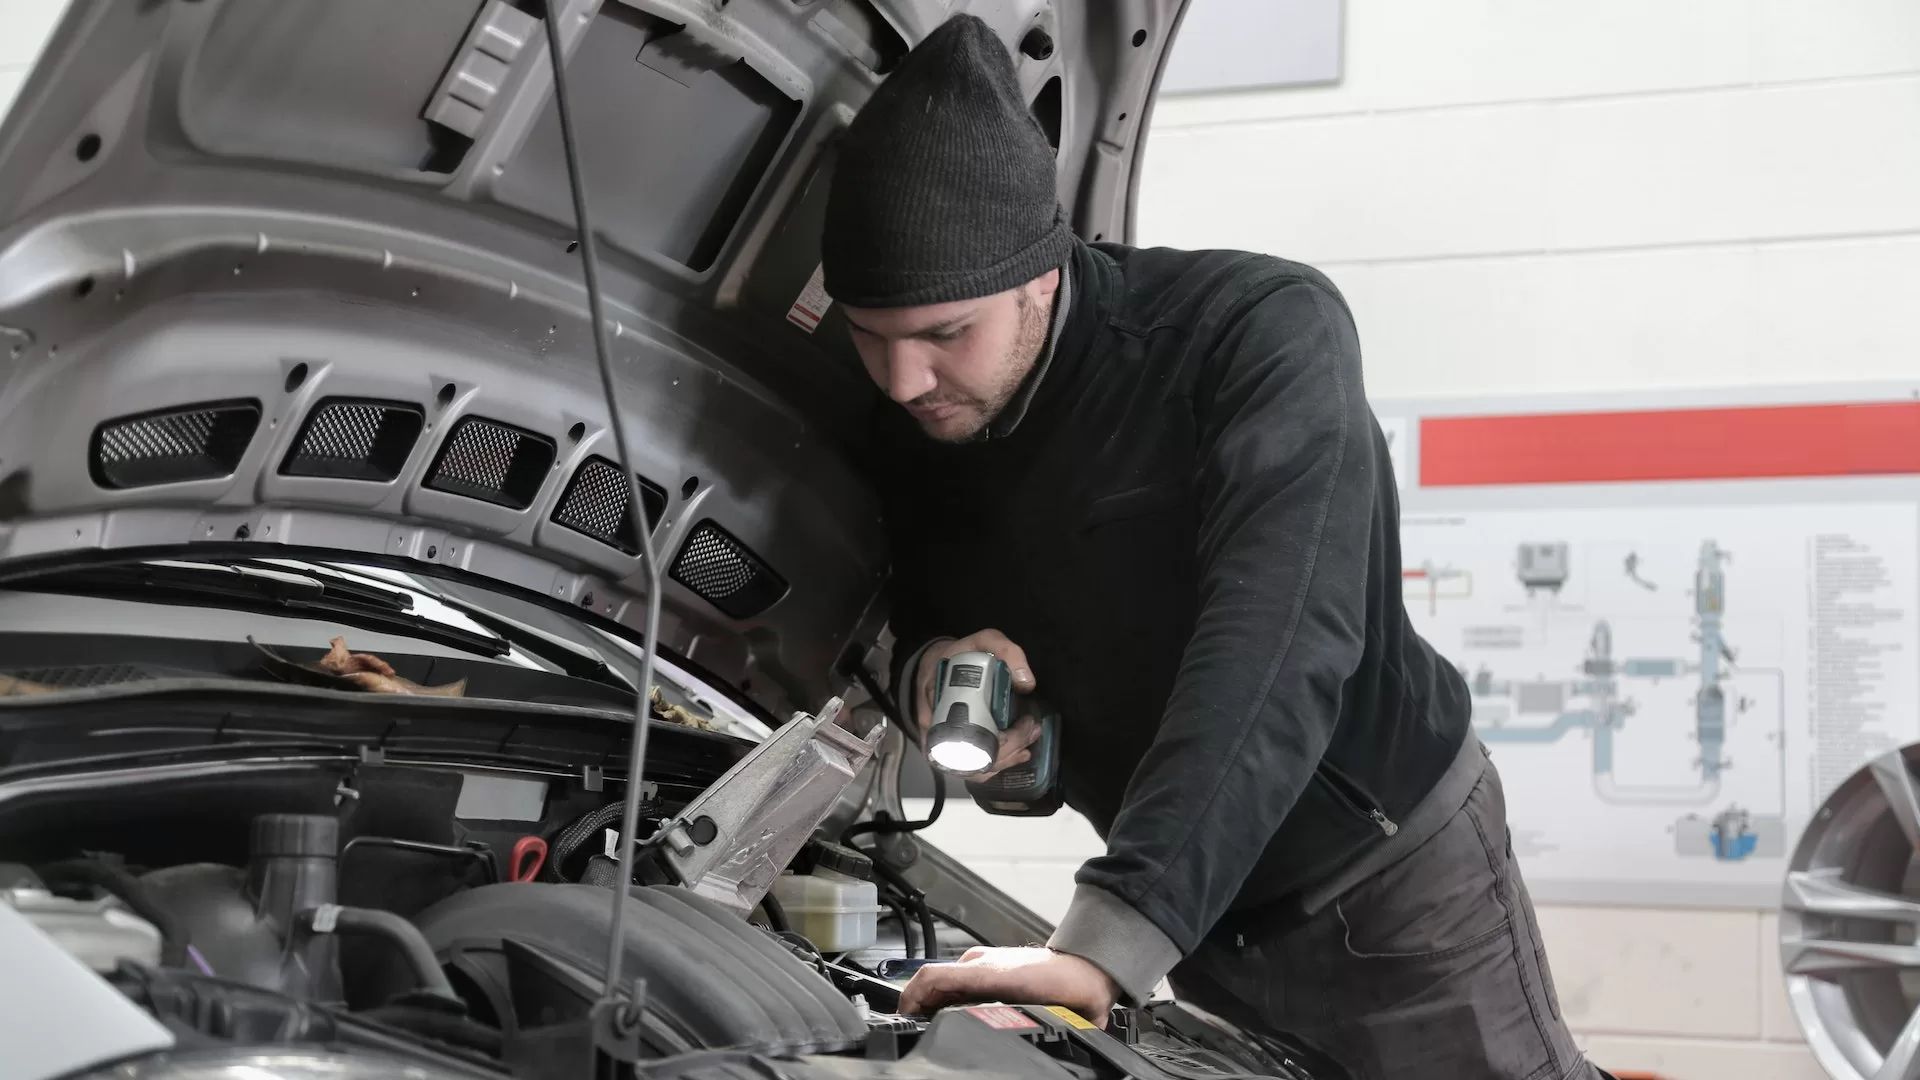 Image of a person inspecting a truck to denote truck spare parts